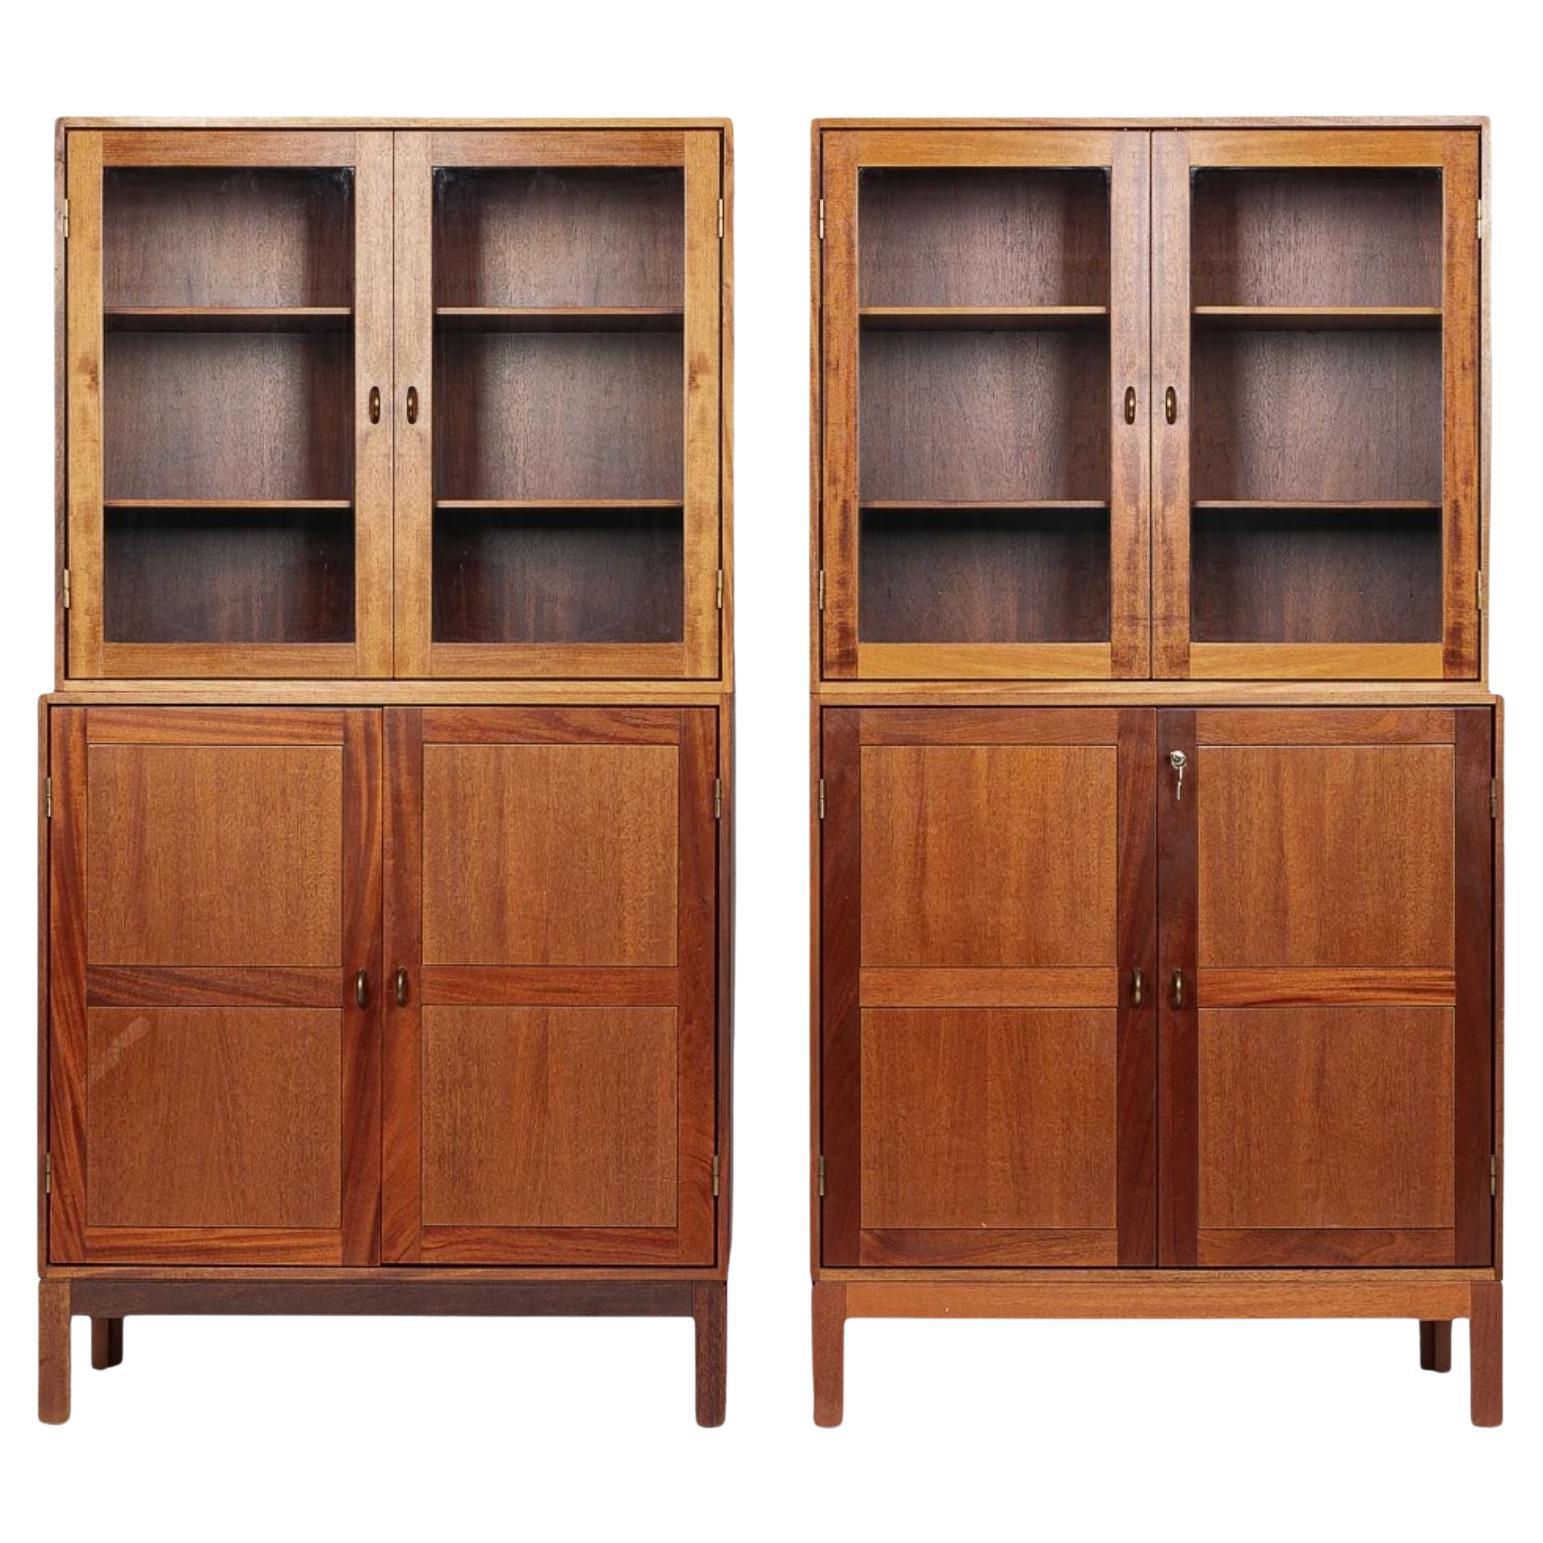 Midcentury Danish Wood Storage Cabinets with Glass Doors & File Drawer